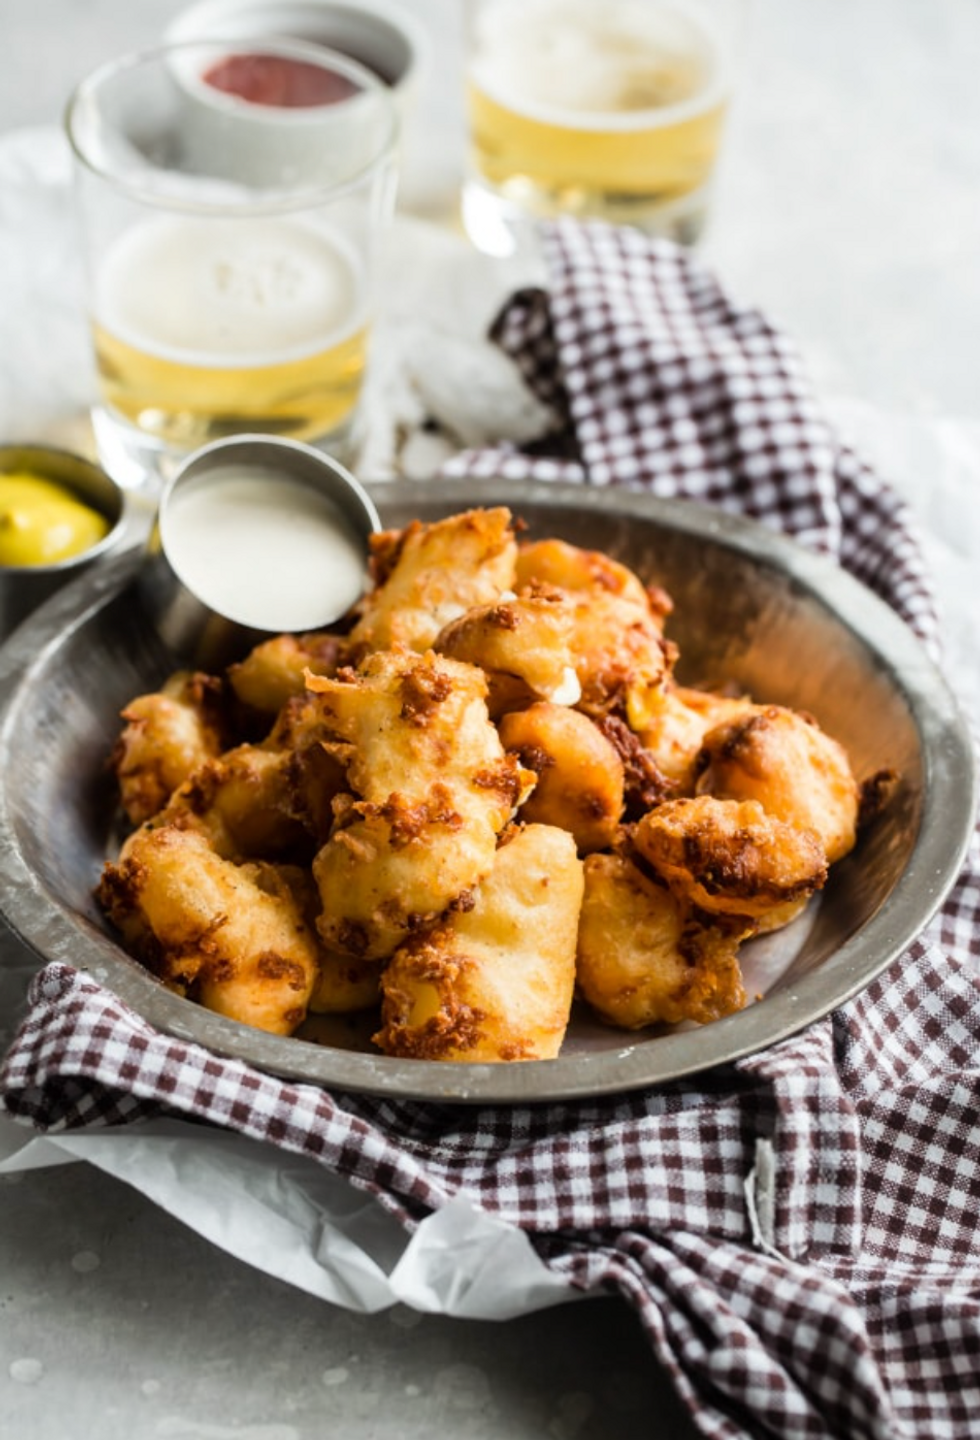 Fried Cheese Curds in a basket recipe